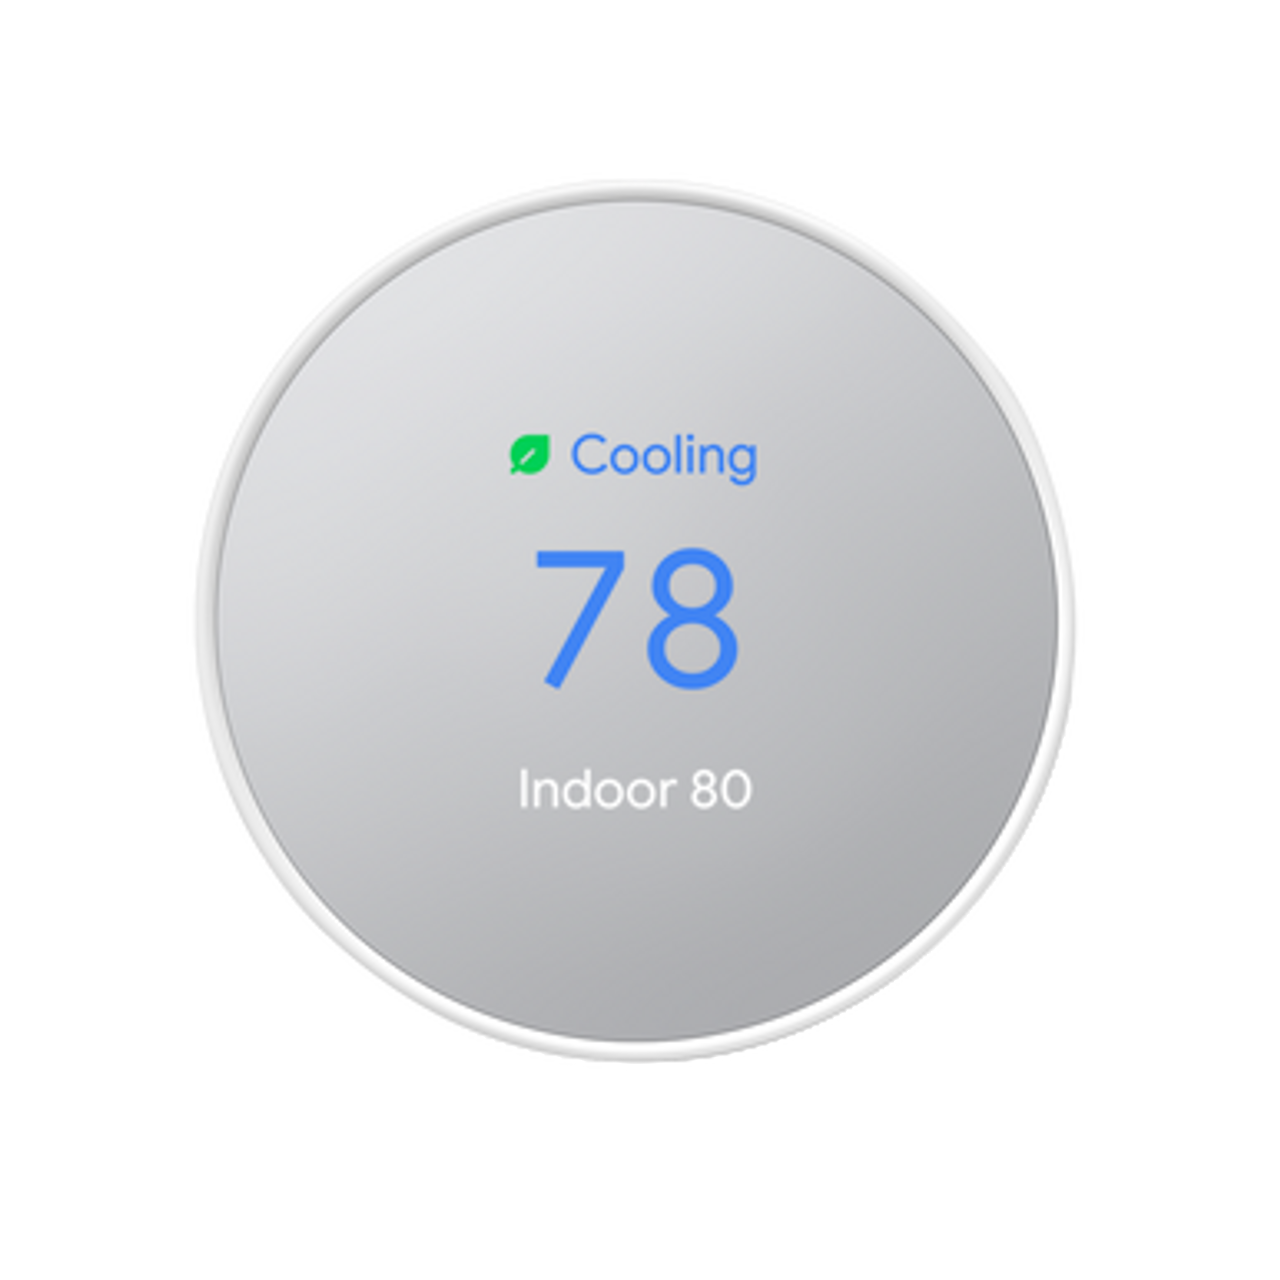 Nest Thermostat set to 78 Cooling